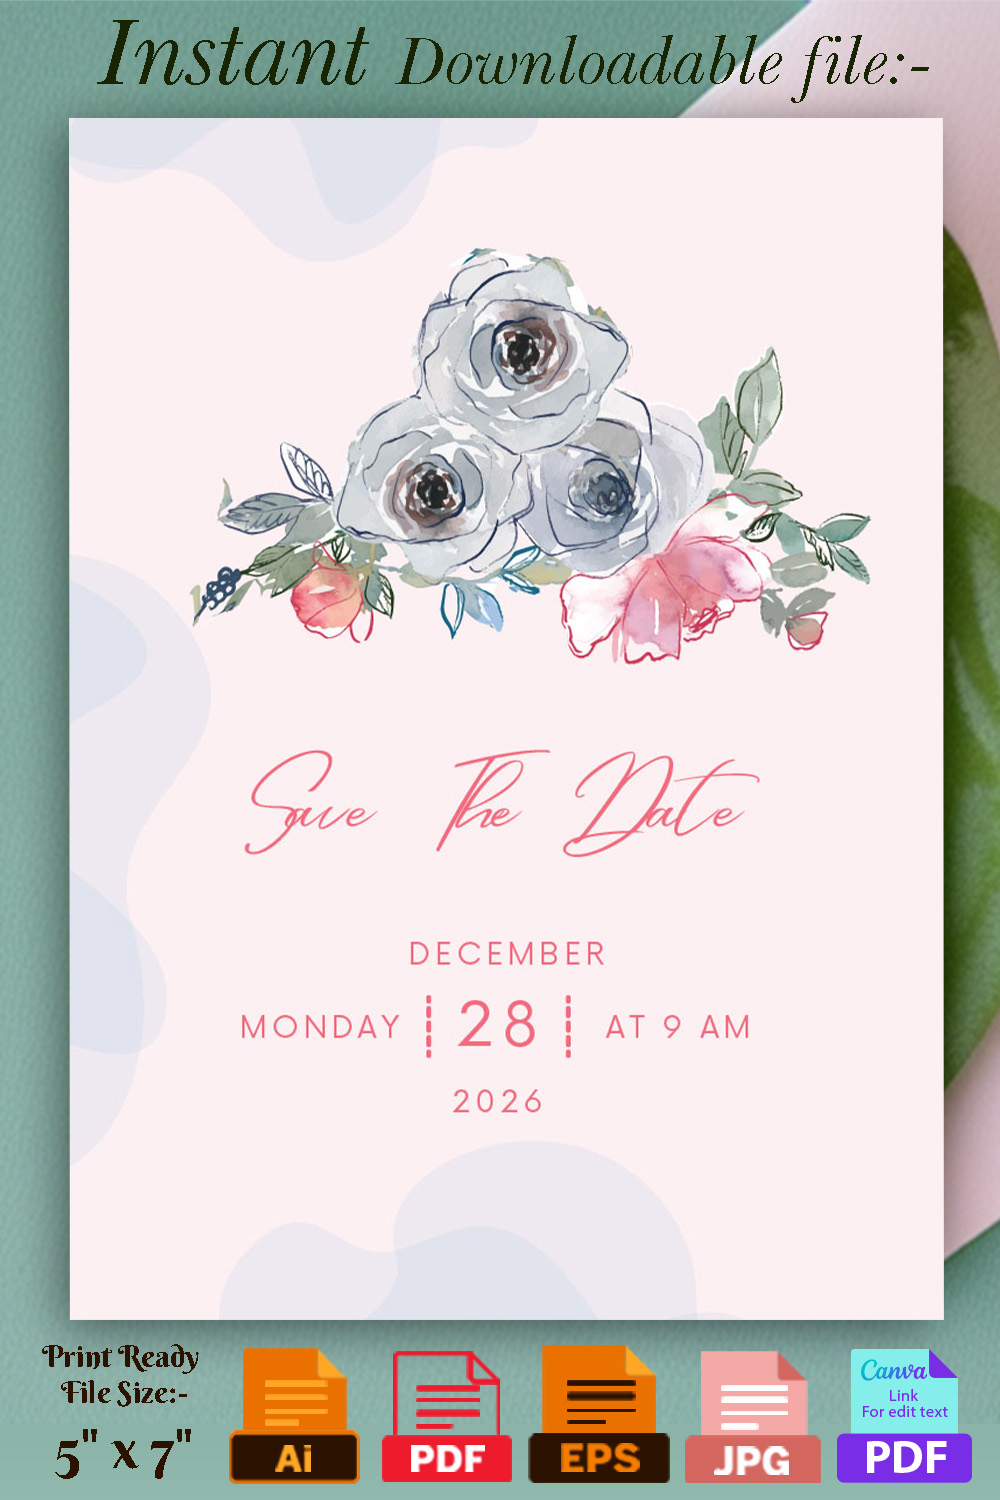 Image with gorgeous wedding invitation card with flowers.